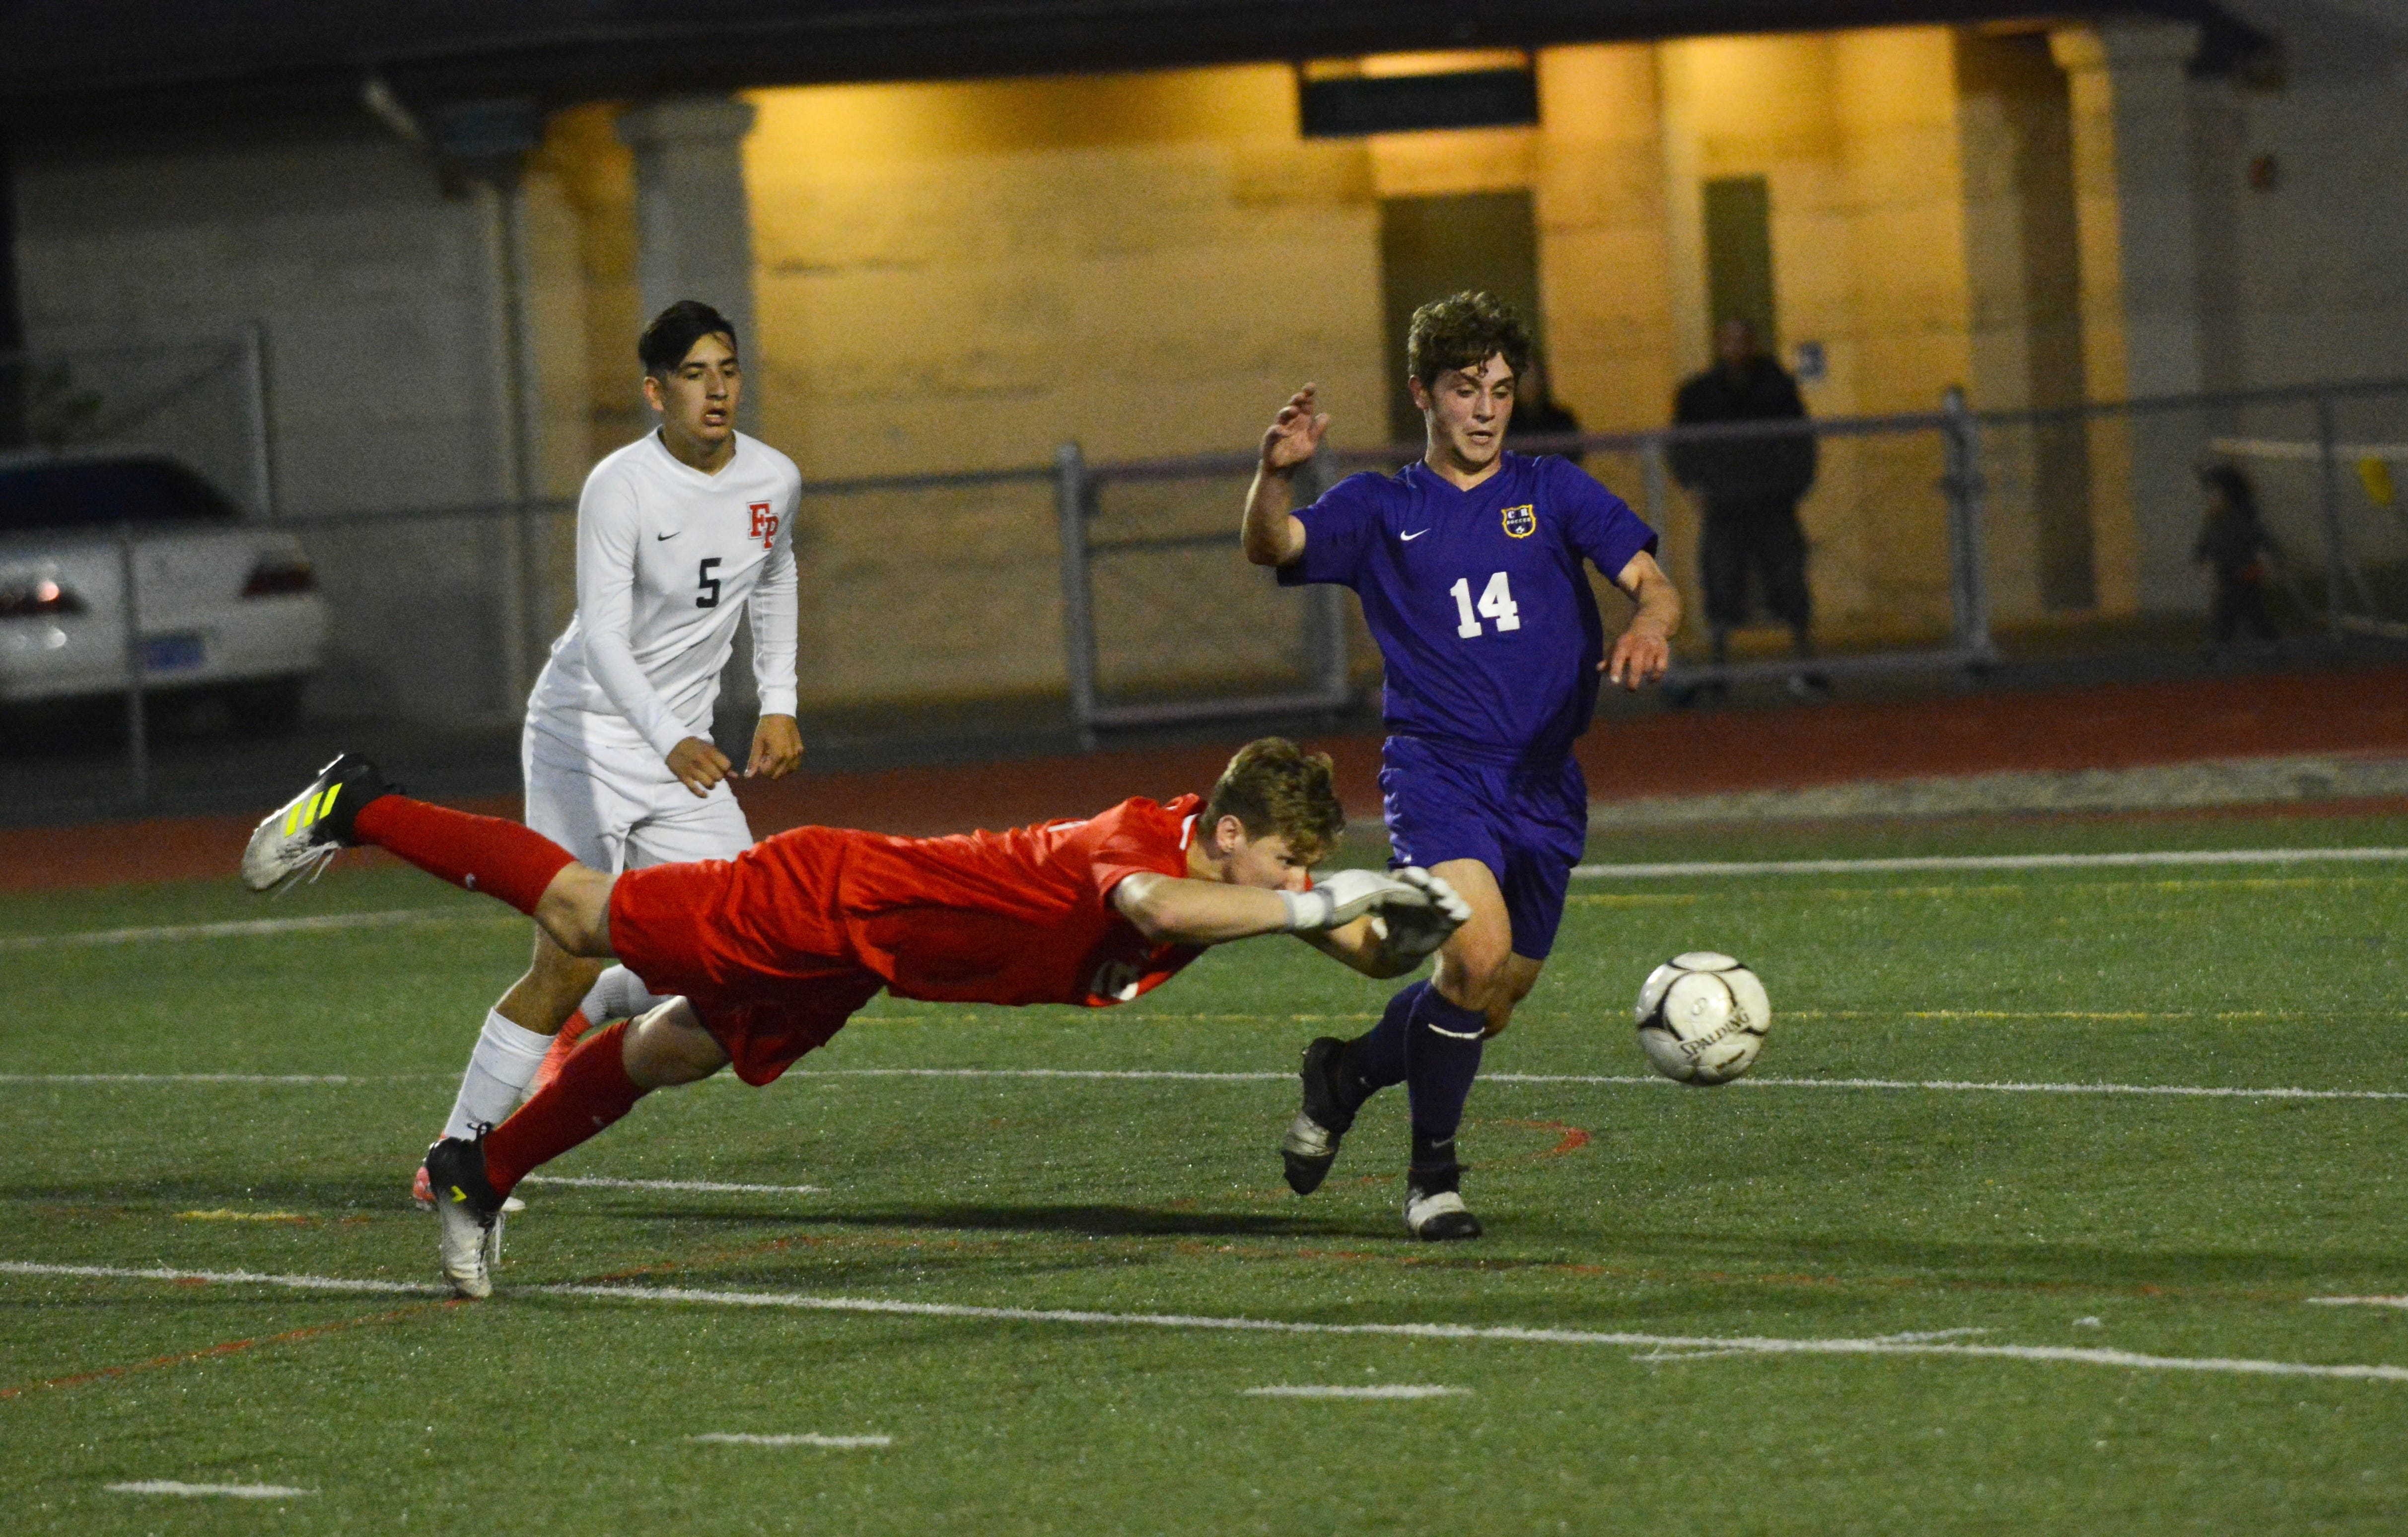 Columbia River forward Jake Connop (right) lunges for a loose ball while Franklin Pierce goalkeeper Noah Carver dives in the first half of the 2A state semifinal at Sumner High School on Friday, May 25, 2018.